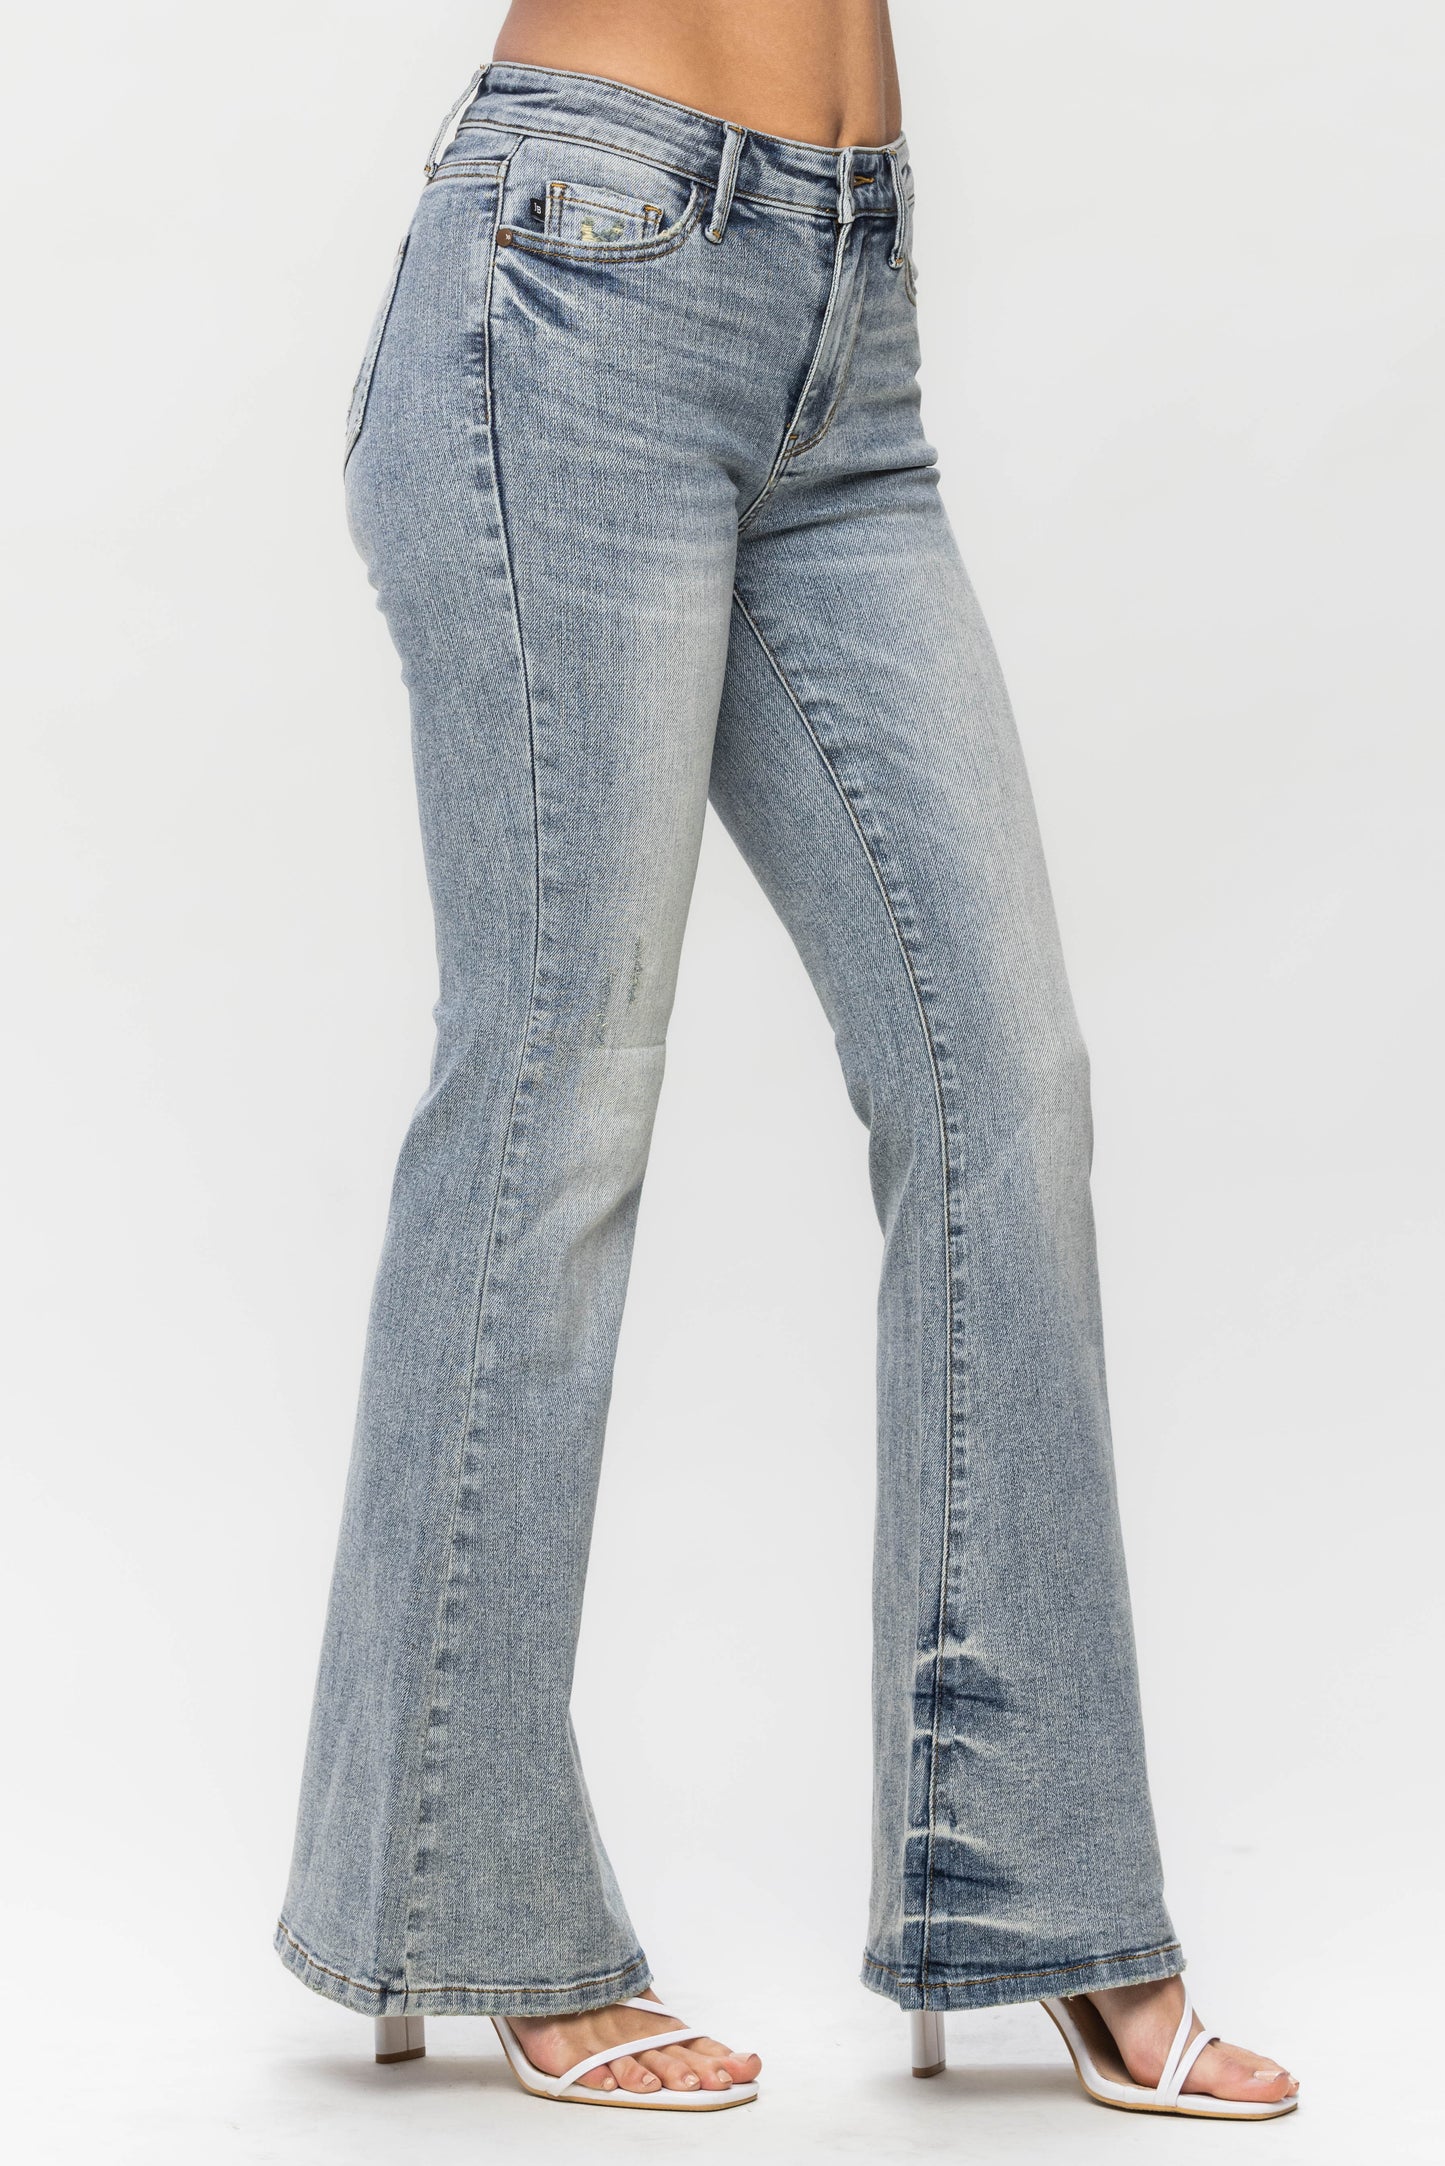 Judy Blue Mid Rise Tinted Flare Denim Jeans